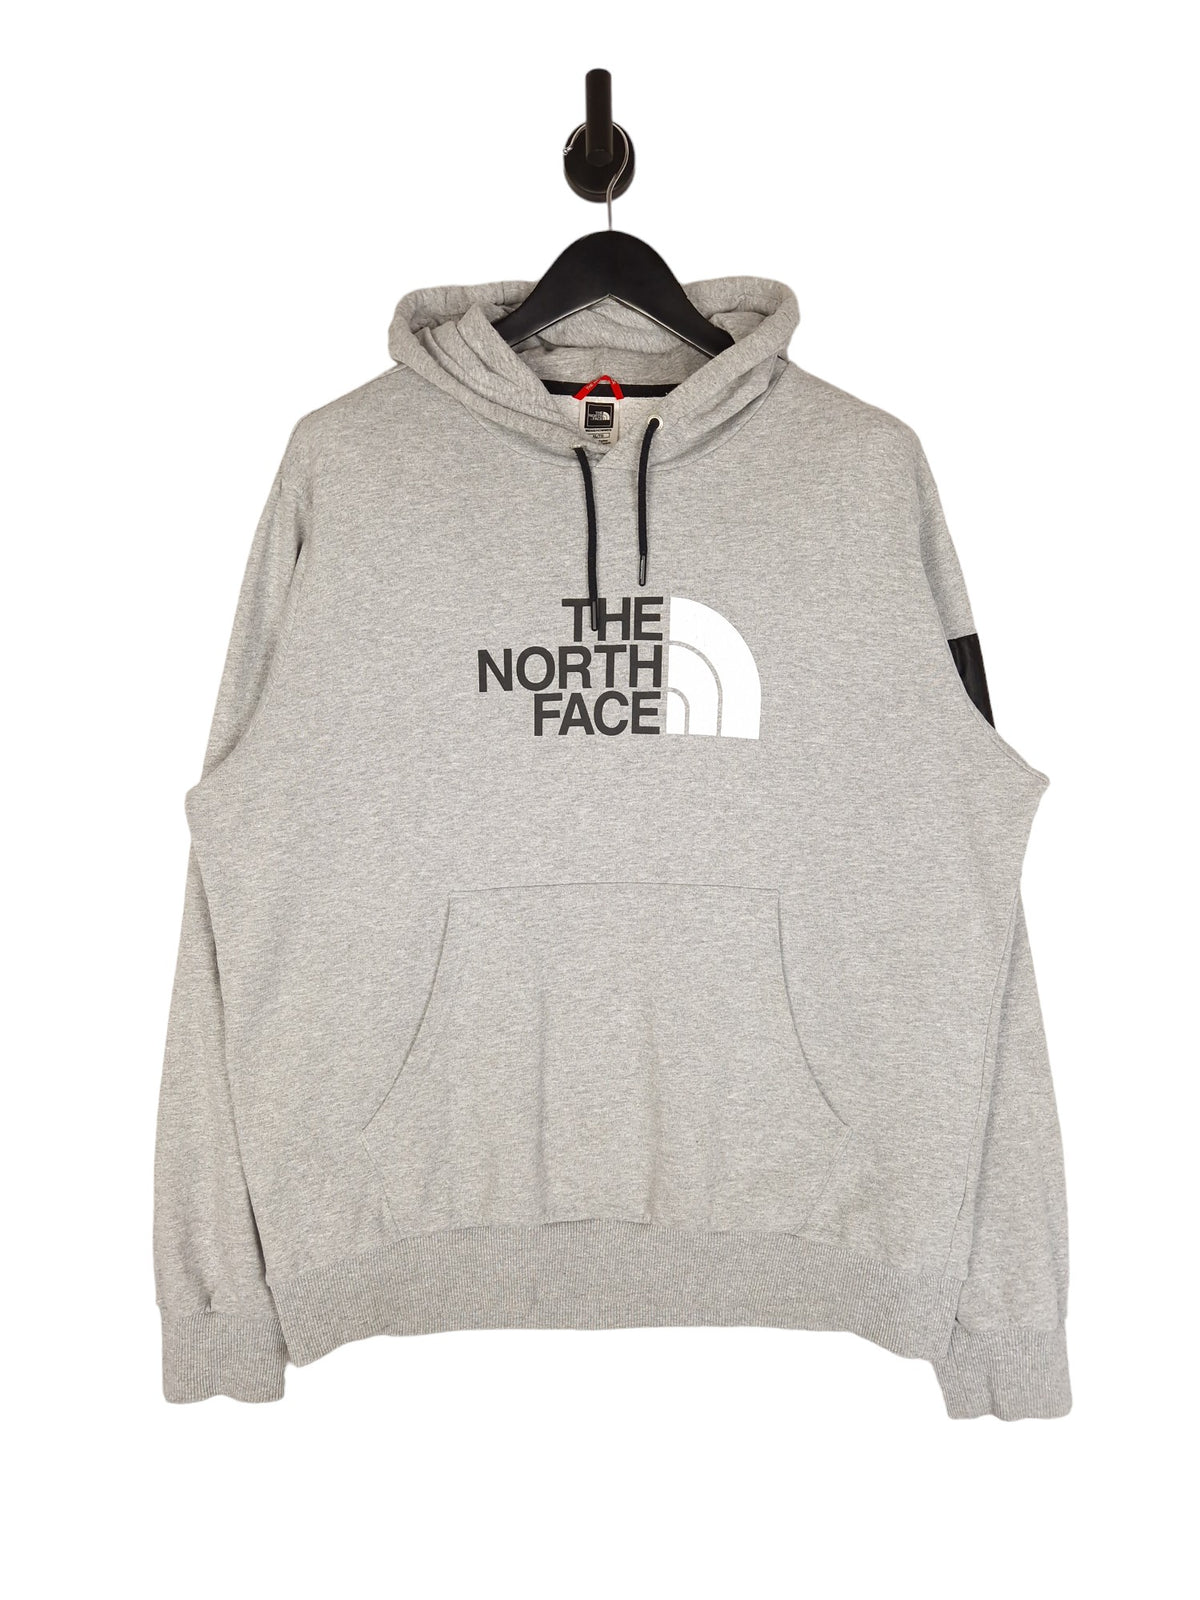 The North Face Hoodie - Size XL